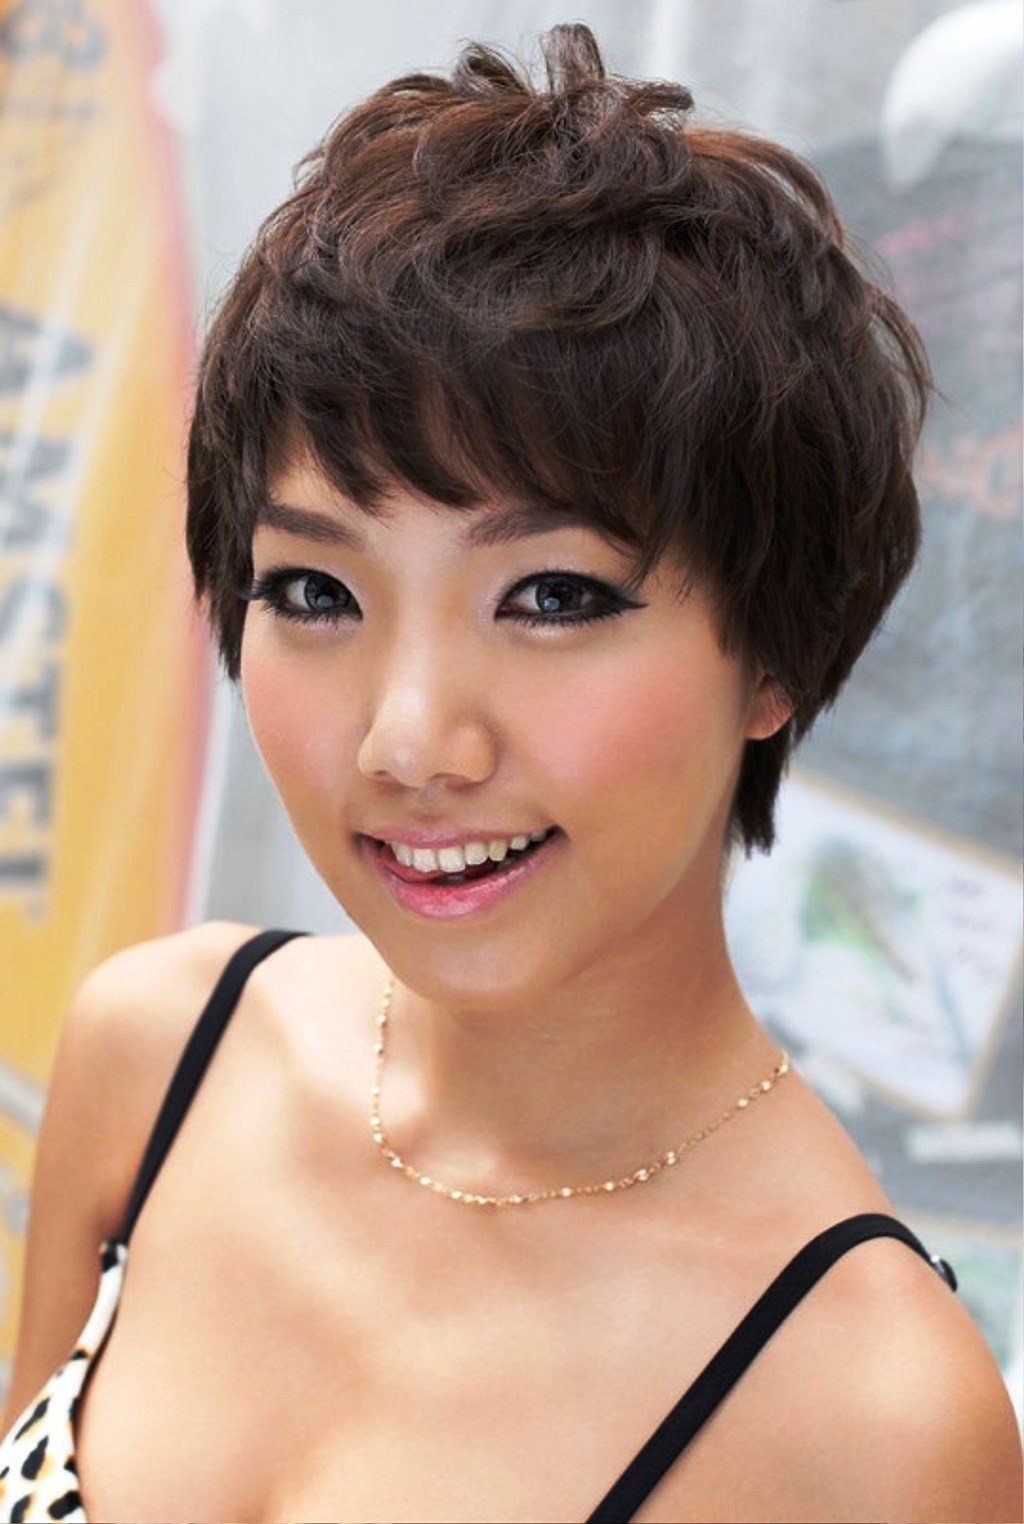 Asian Female Hairstyle
 of Hottest Boyish Short Asian Hairstyle For Girls